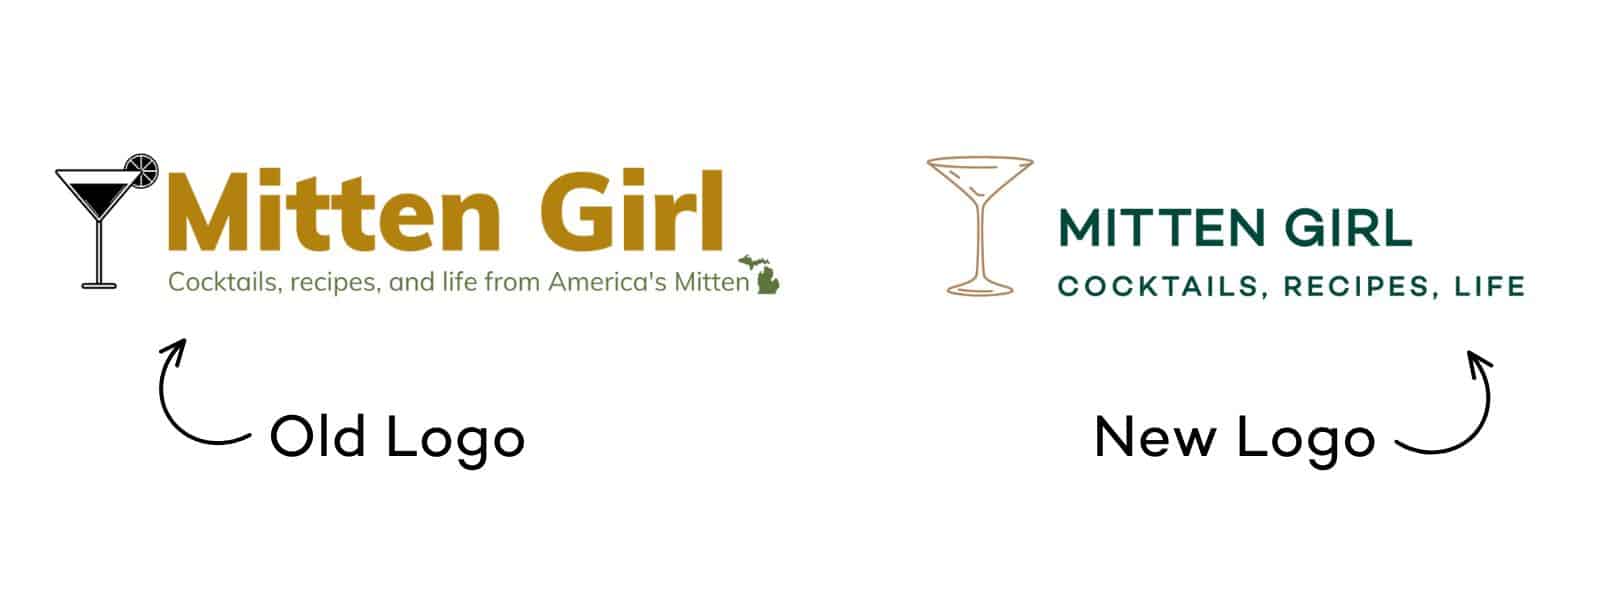 Comparing the old and new Mitten Girl logos. 